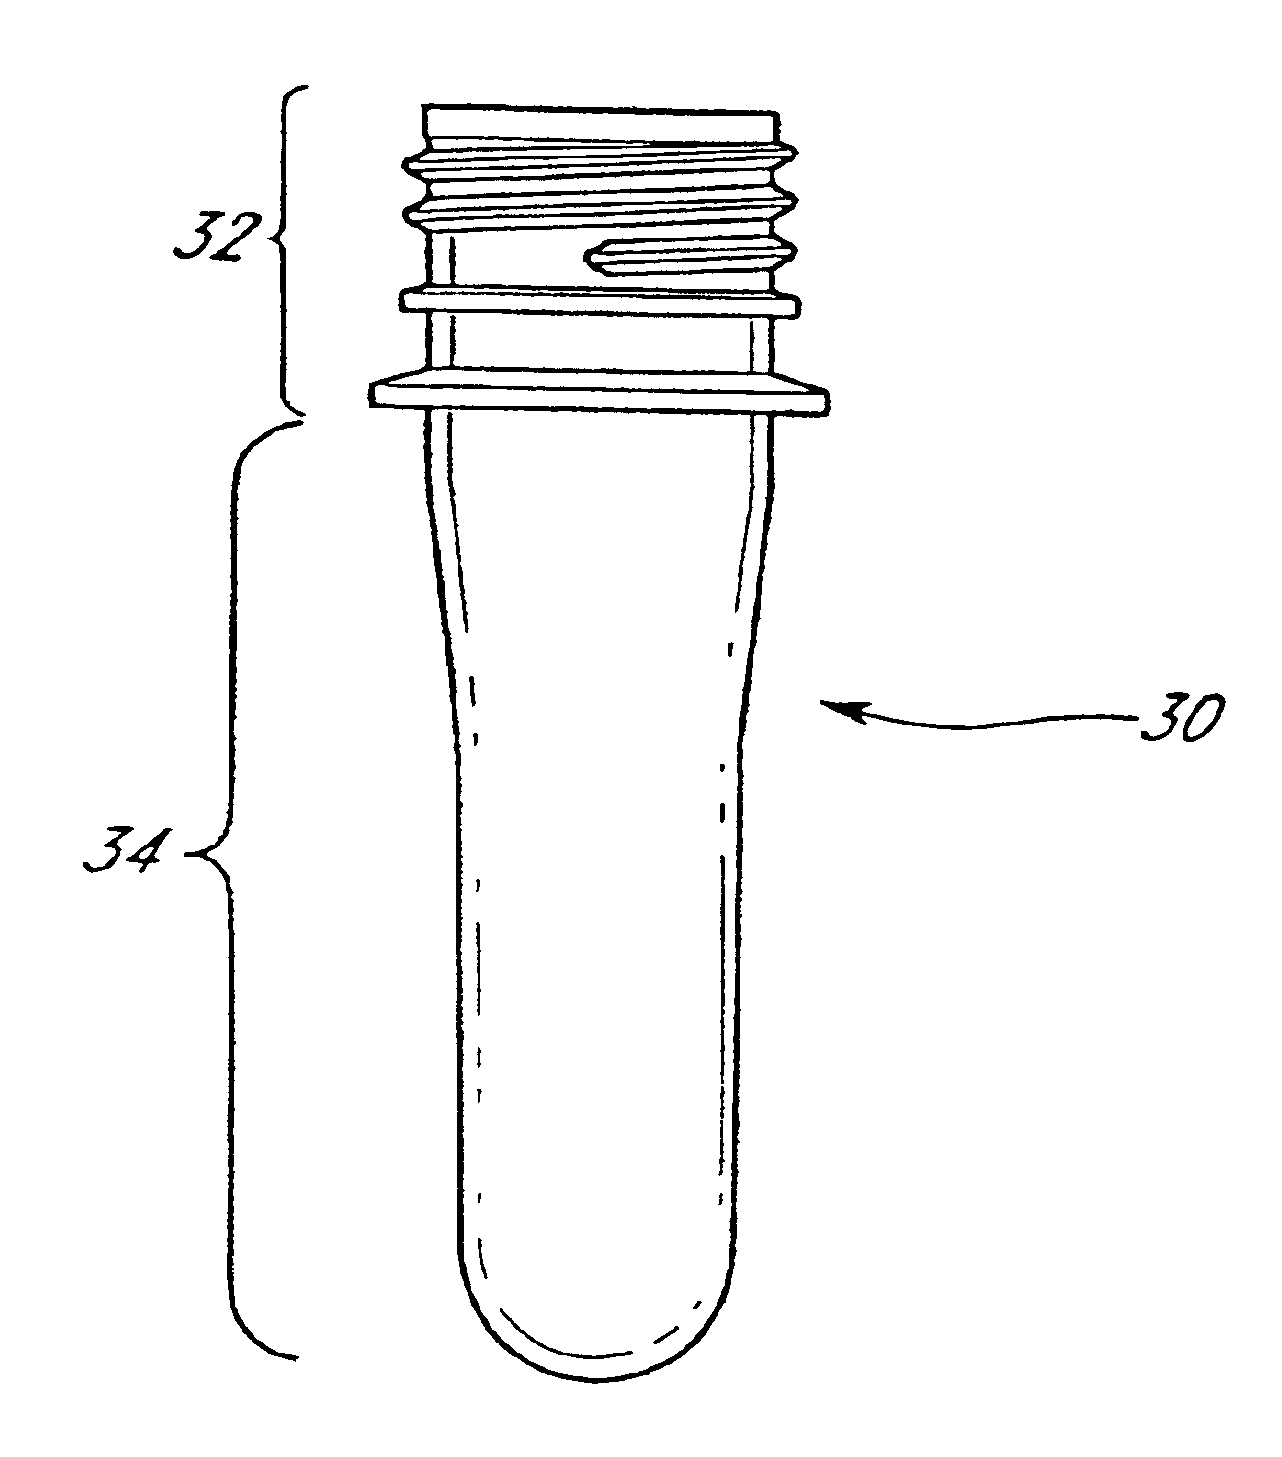 Multilayer containers and preforms having barrier properties utilizing recycled material